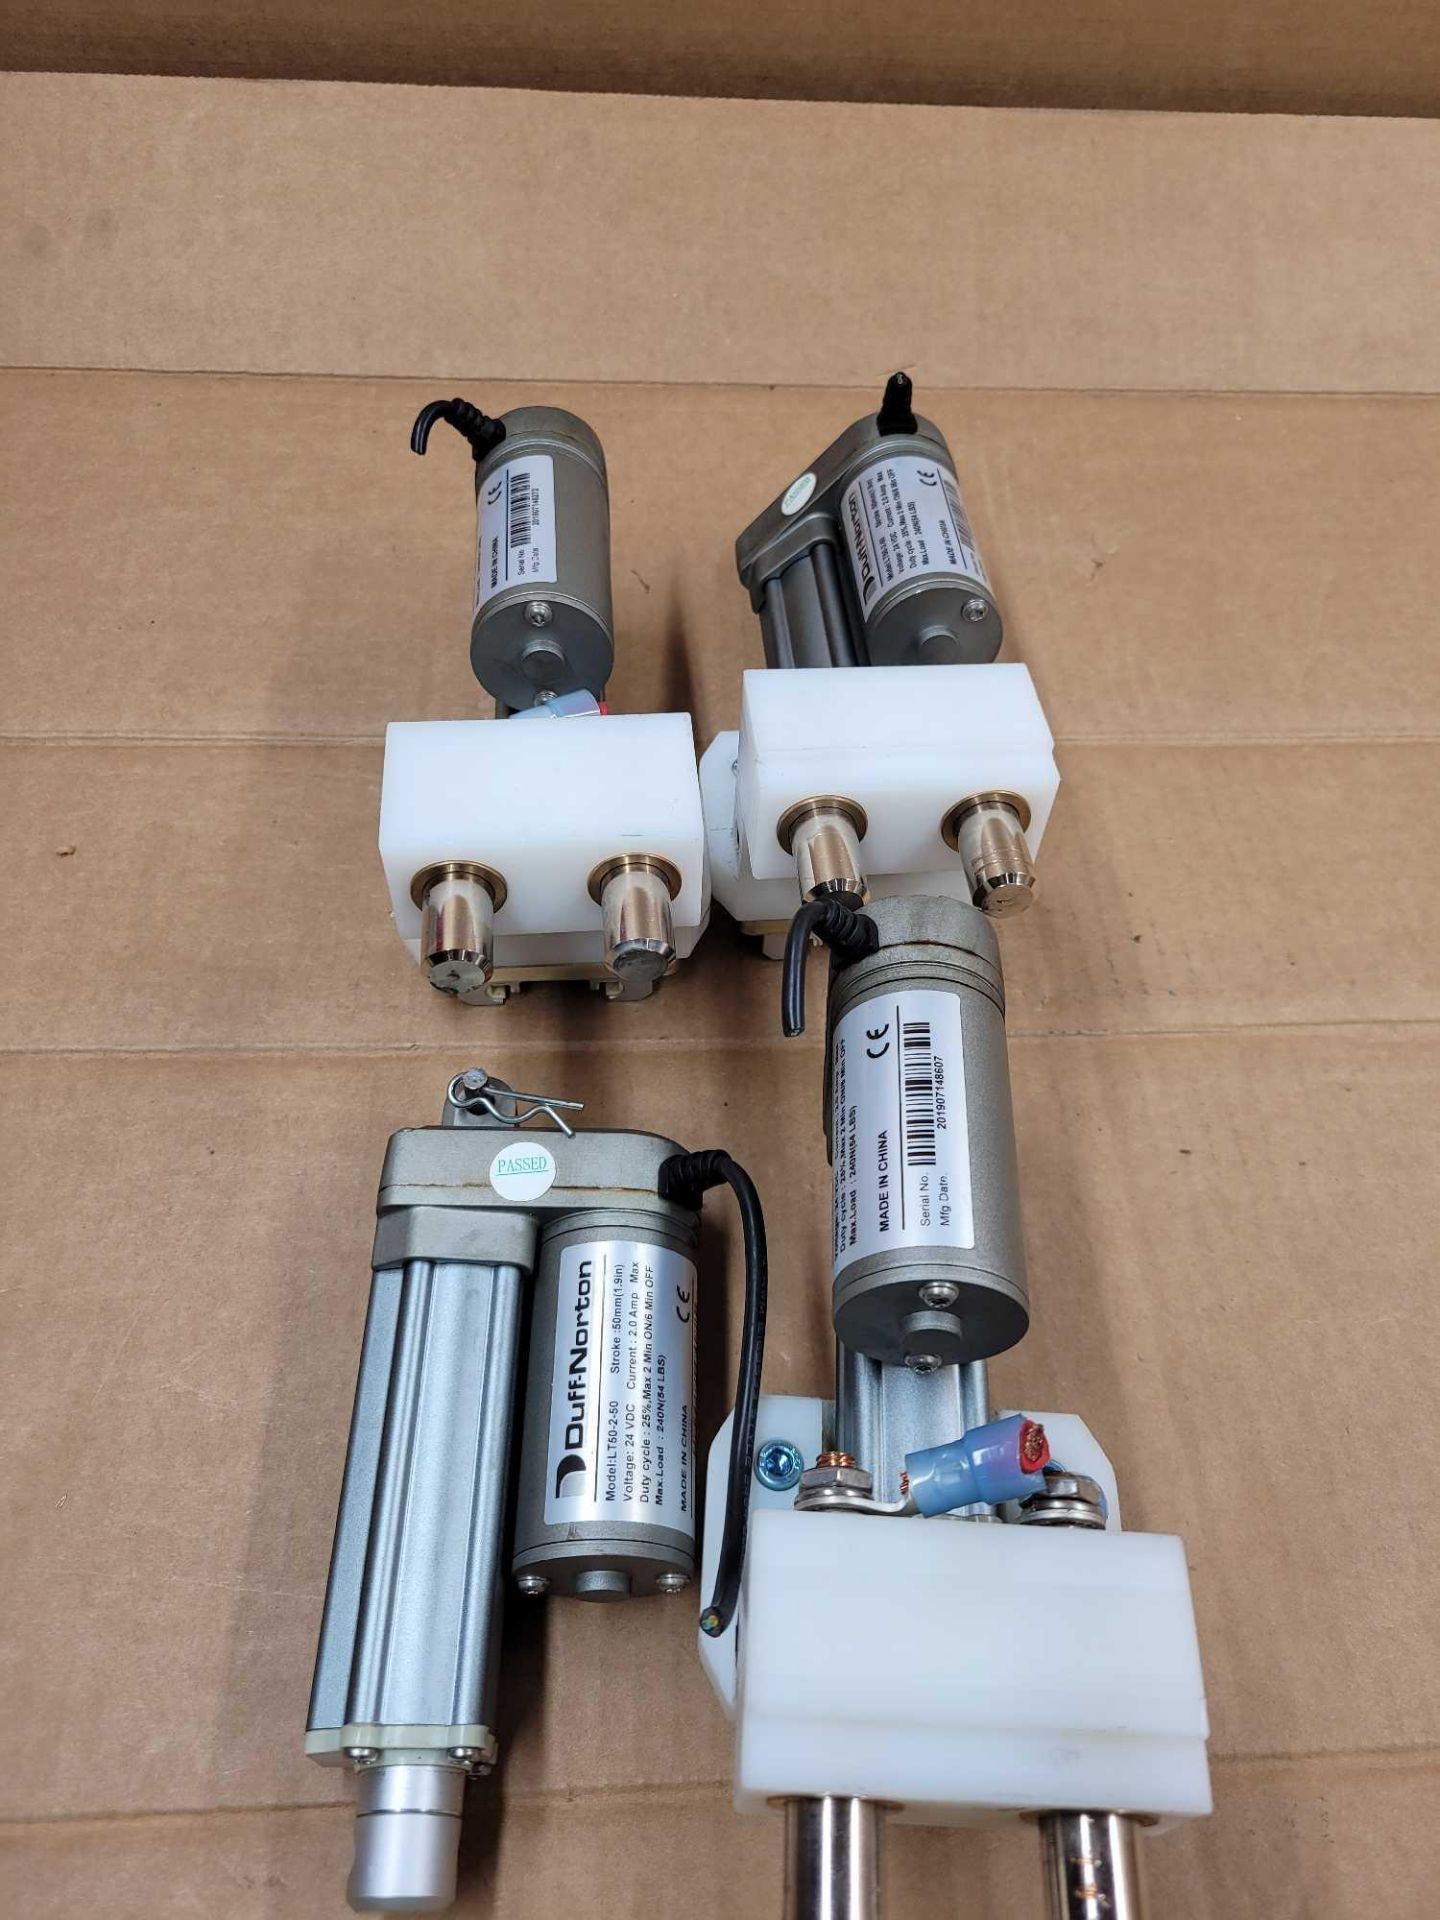 LOT OF 4 DUFF-NORTON LT50-2-50 / Linear Actuator  /  Lot Weight: 11.0 lbs